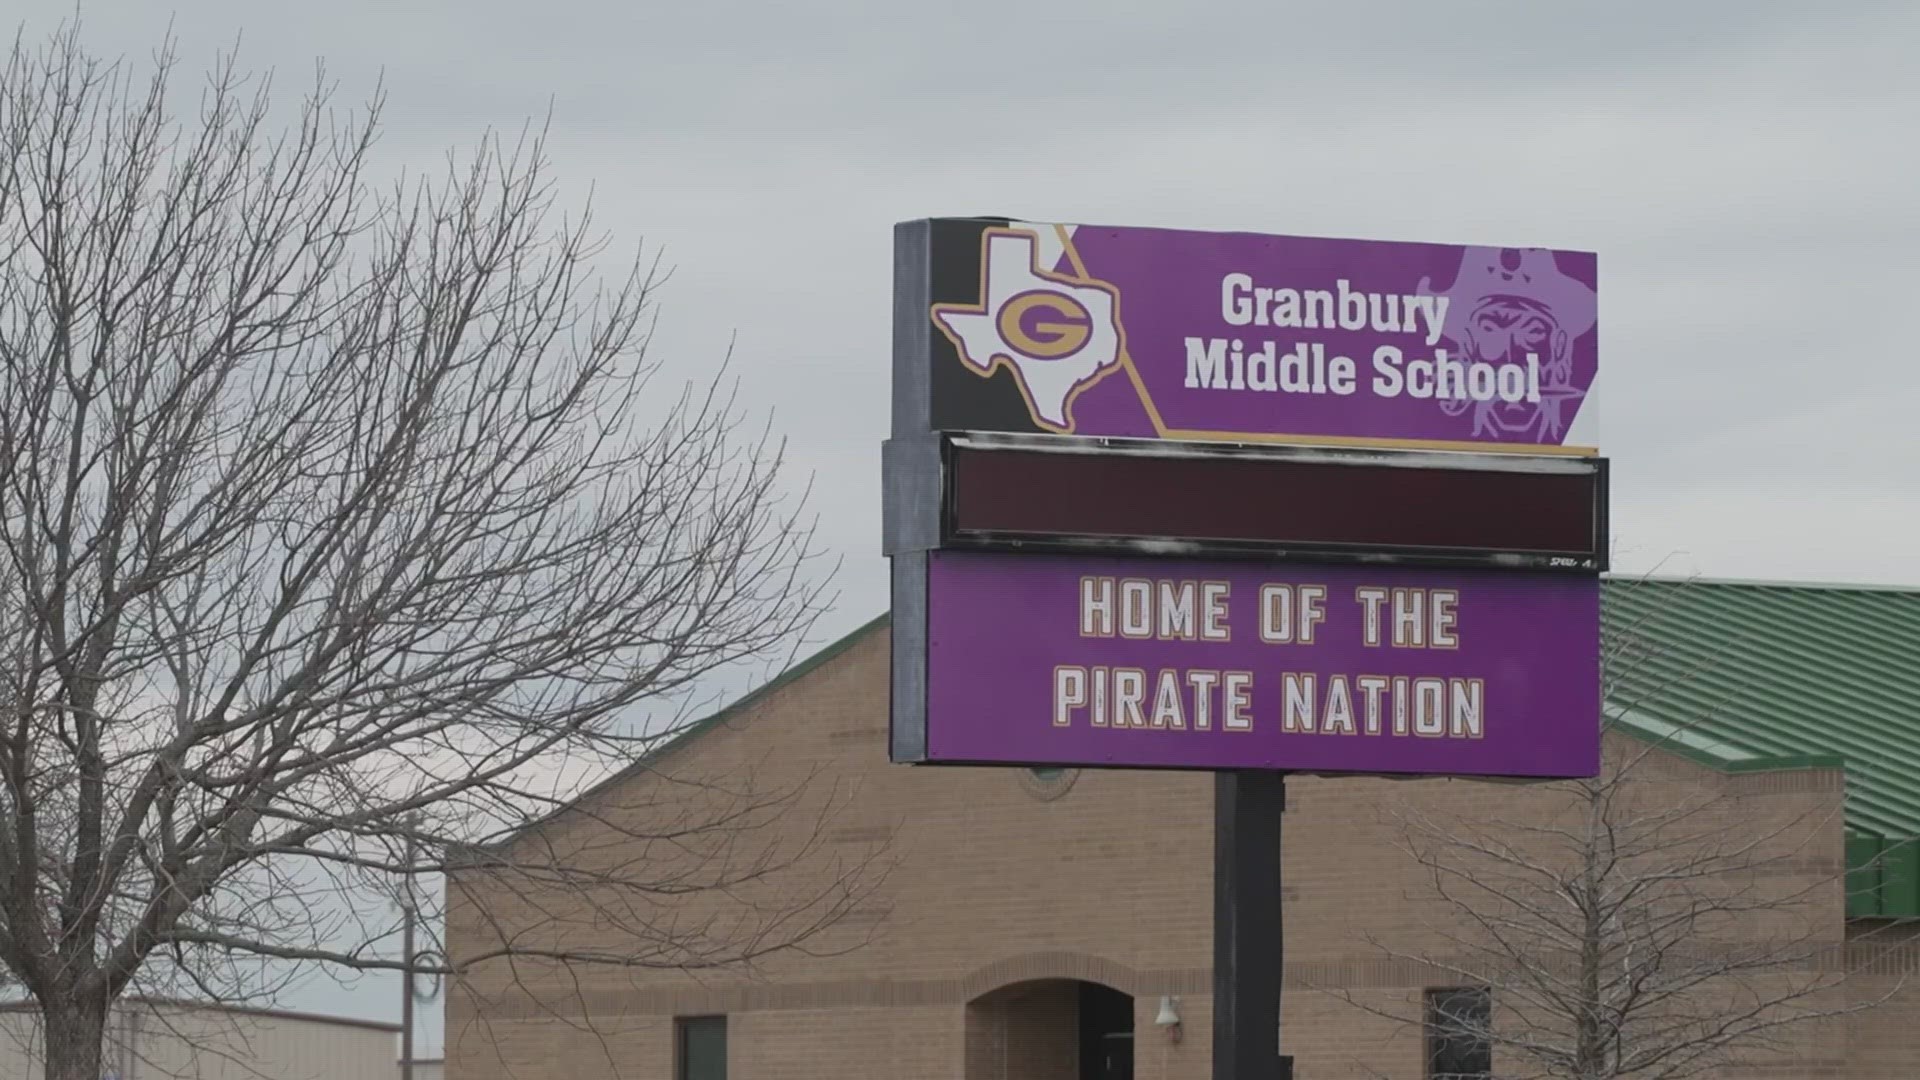 Eight classmates were hospitalized last week, after eating candy they got from another student at Granbury Middle School.